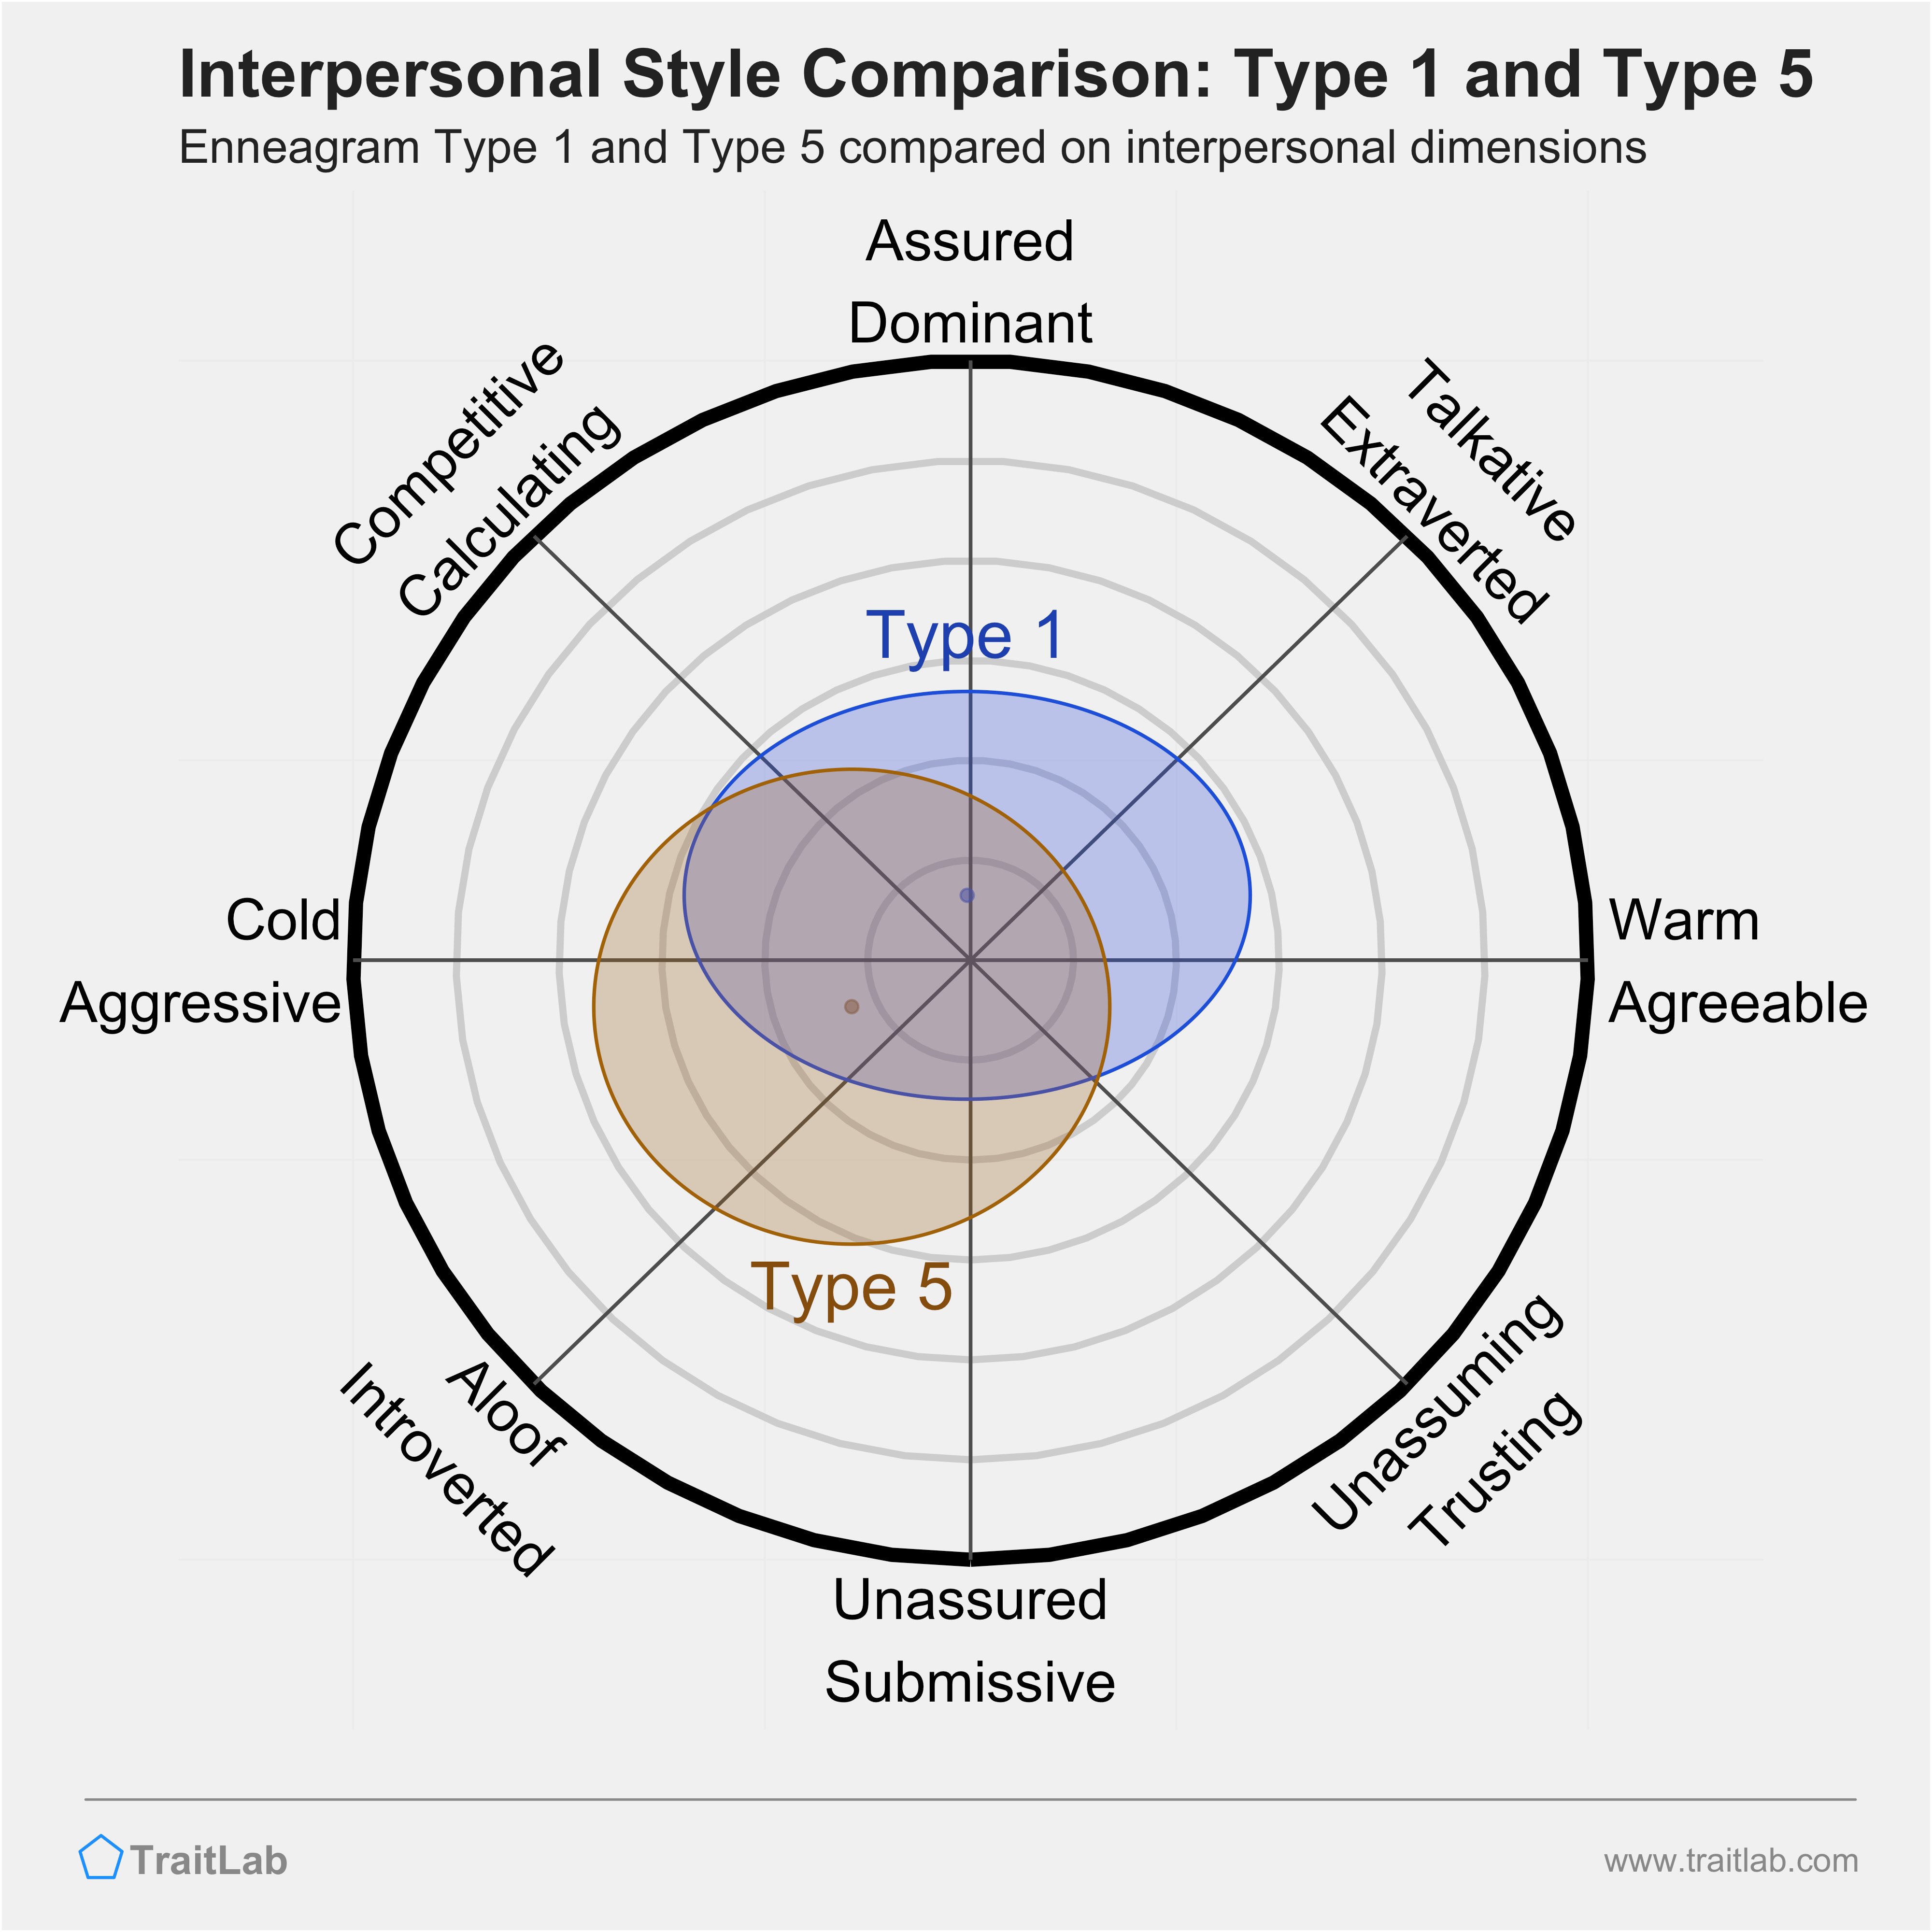 Enneagram Type 1 and Type 5 comparison across interpersonal dimensions